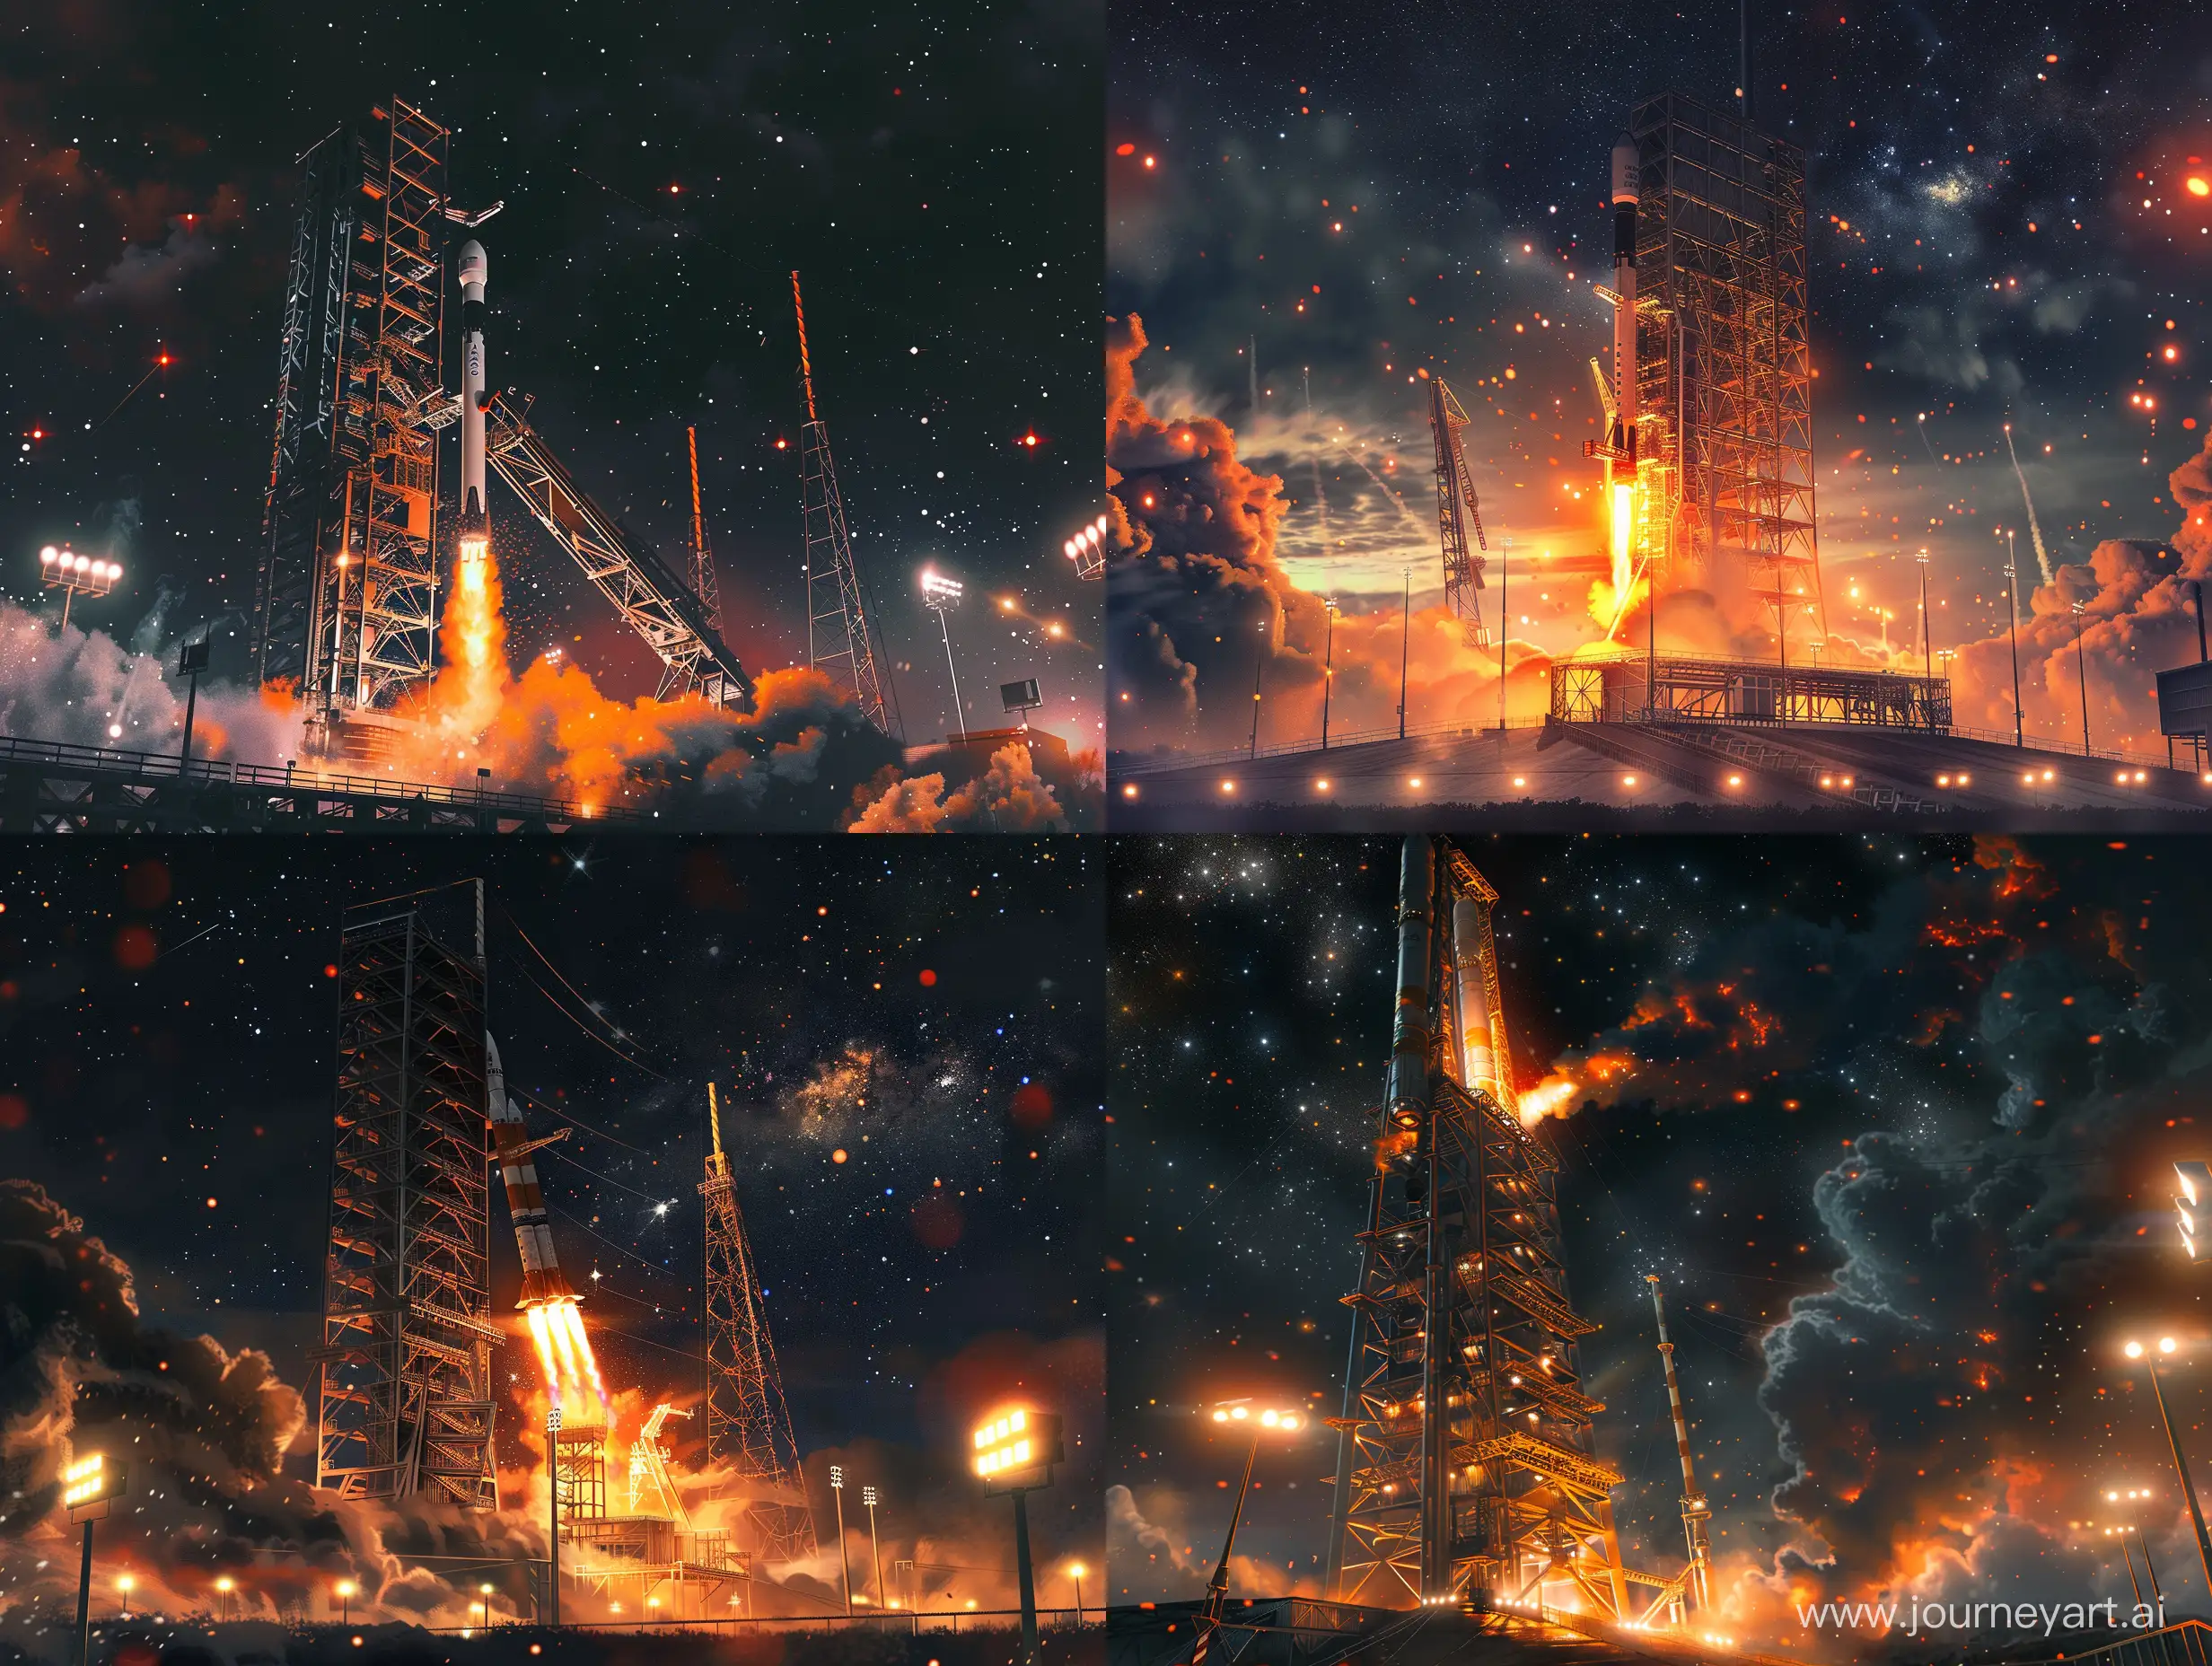 A photorealistic illustration of a massive steel launch pad structure against a dark sky with stars, with a rocket on the pad being prepared for launch, with orange flames and smoke coming from the rocket's engines, with the scene lit by floodlights and spotlights. --v 6 --ar 4:3 --no 12508